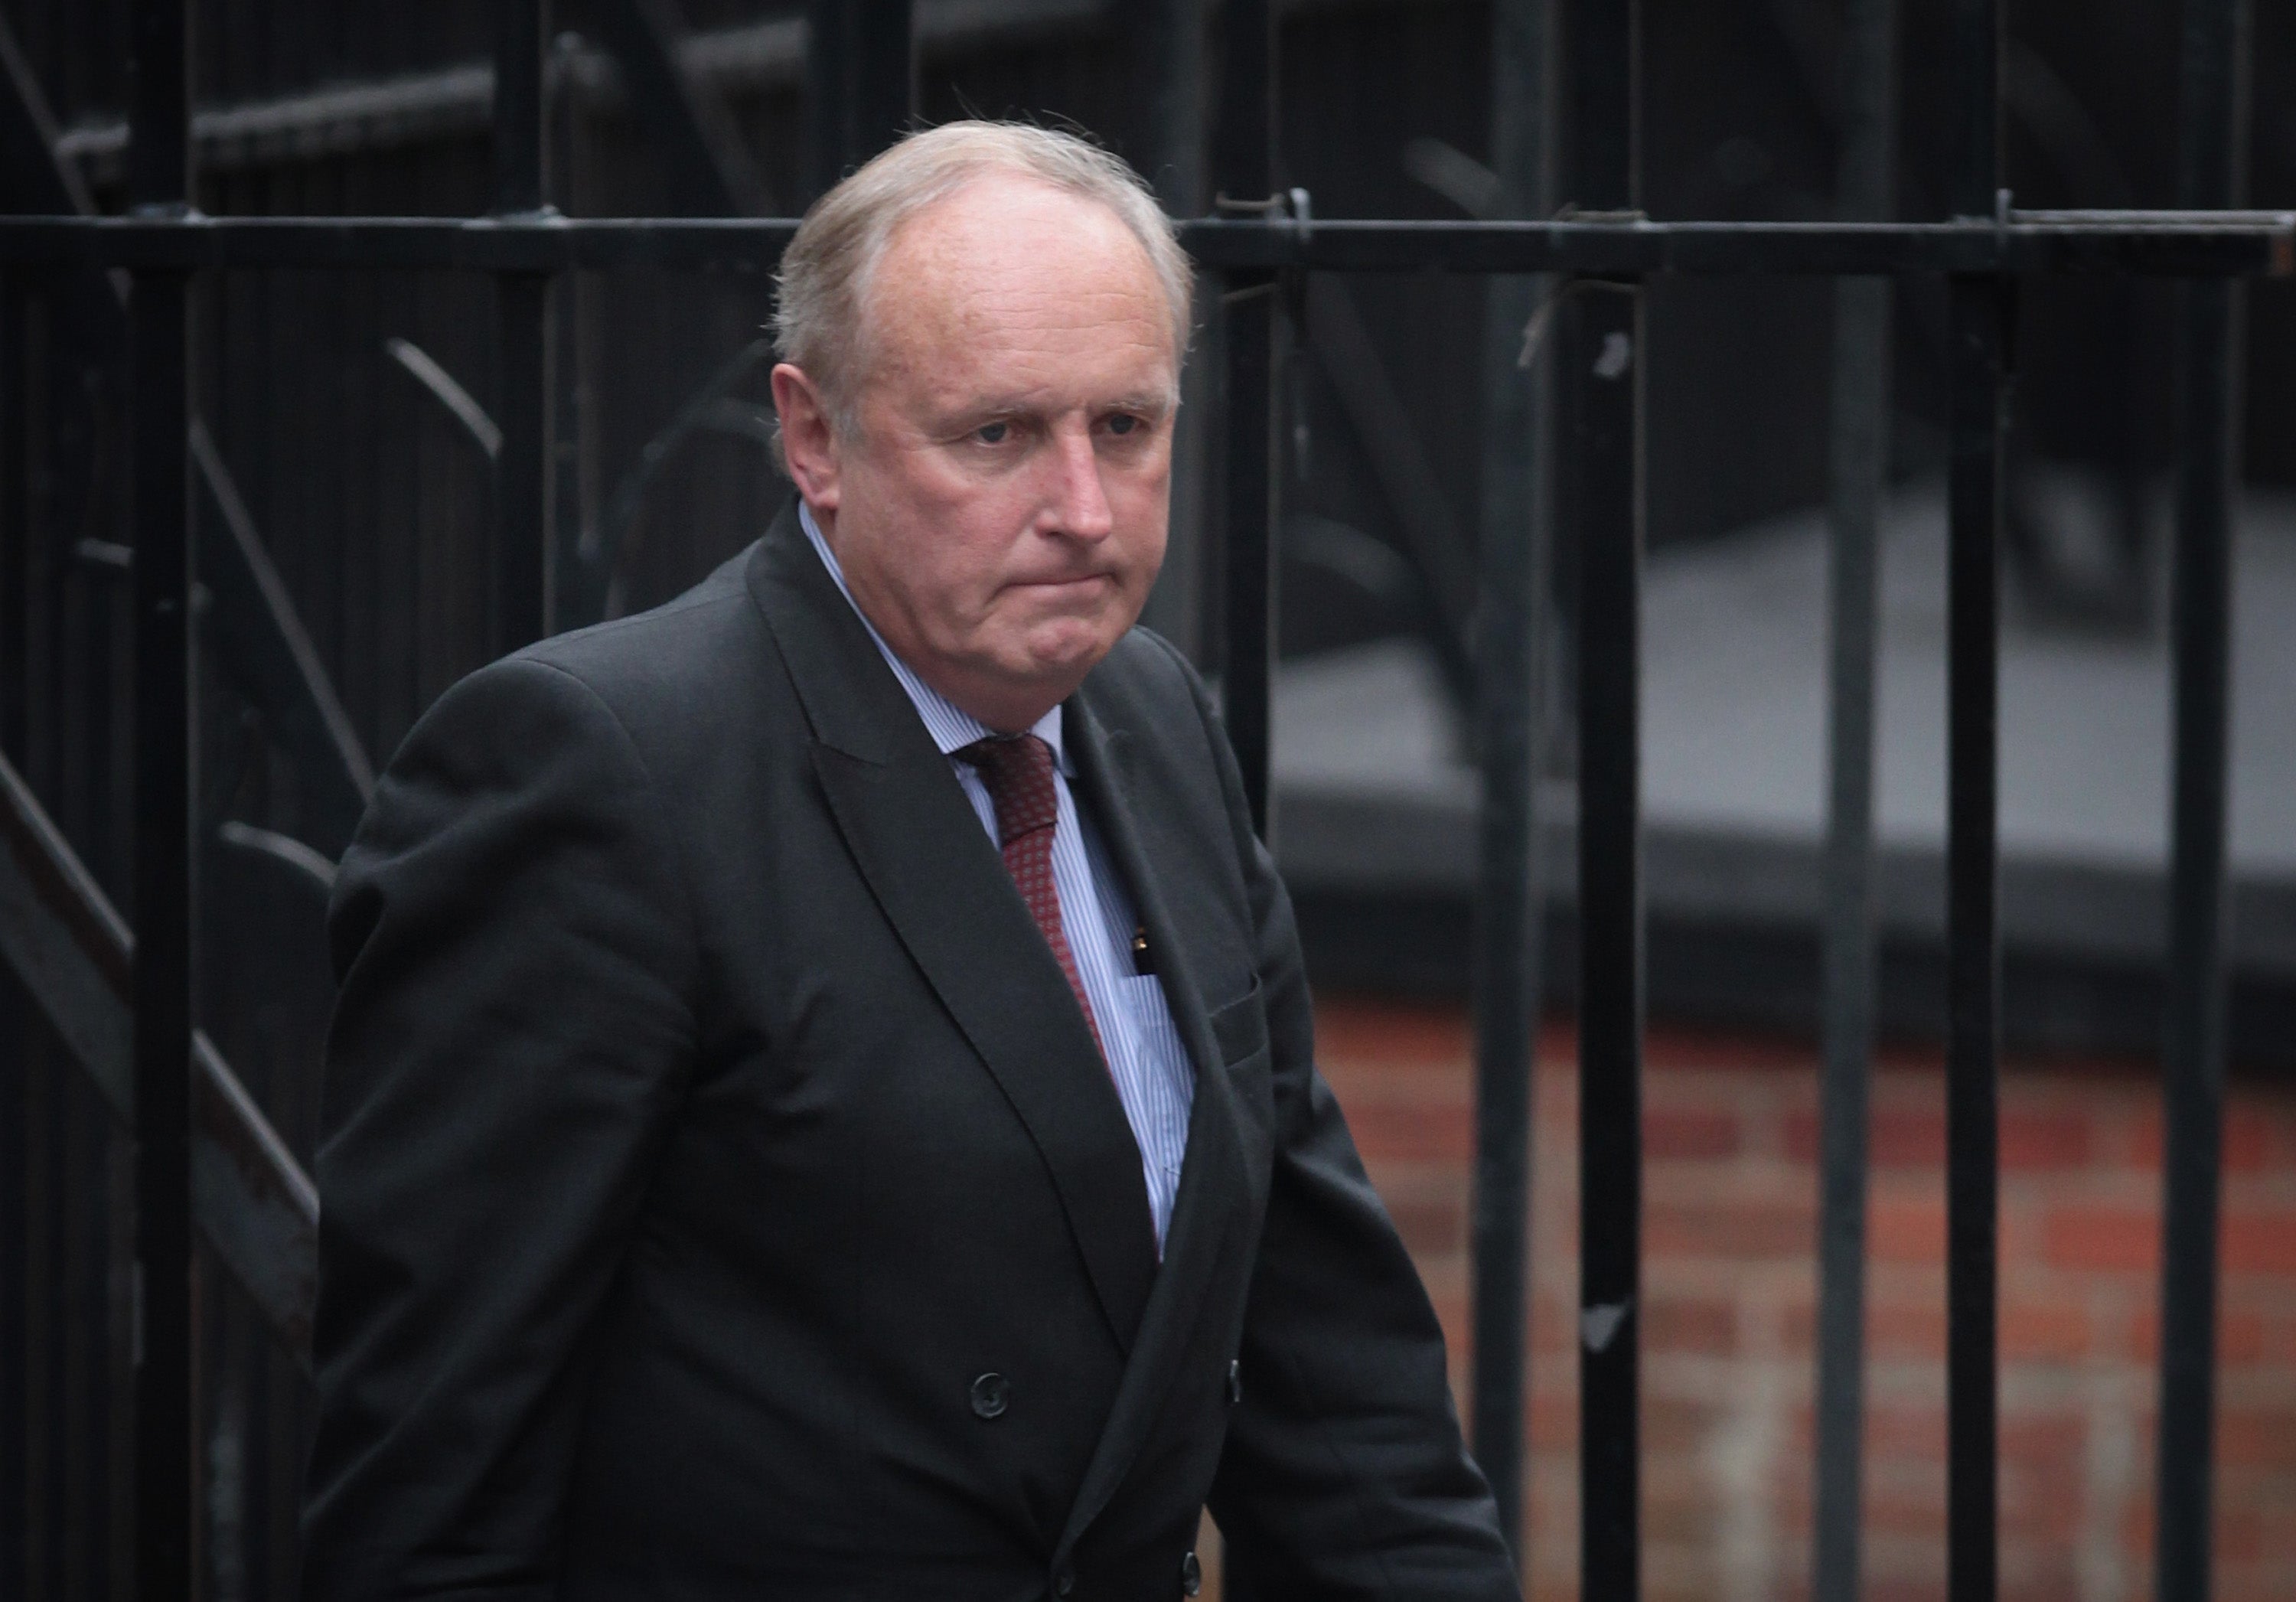 Paul Dacre edited the Daily Mail for 26 years